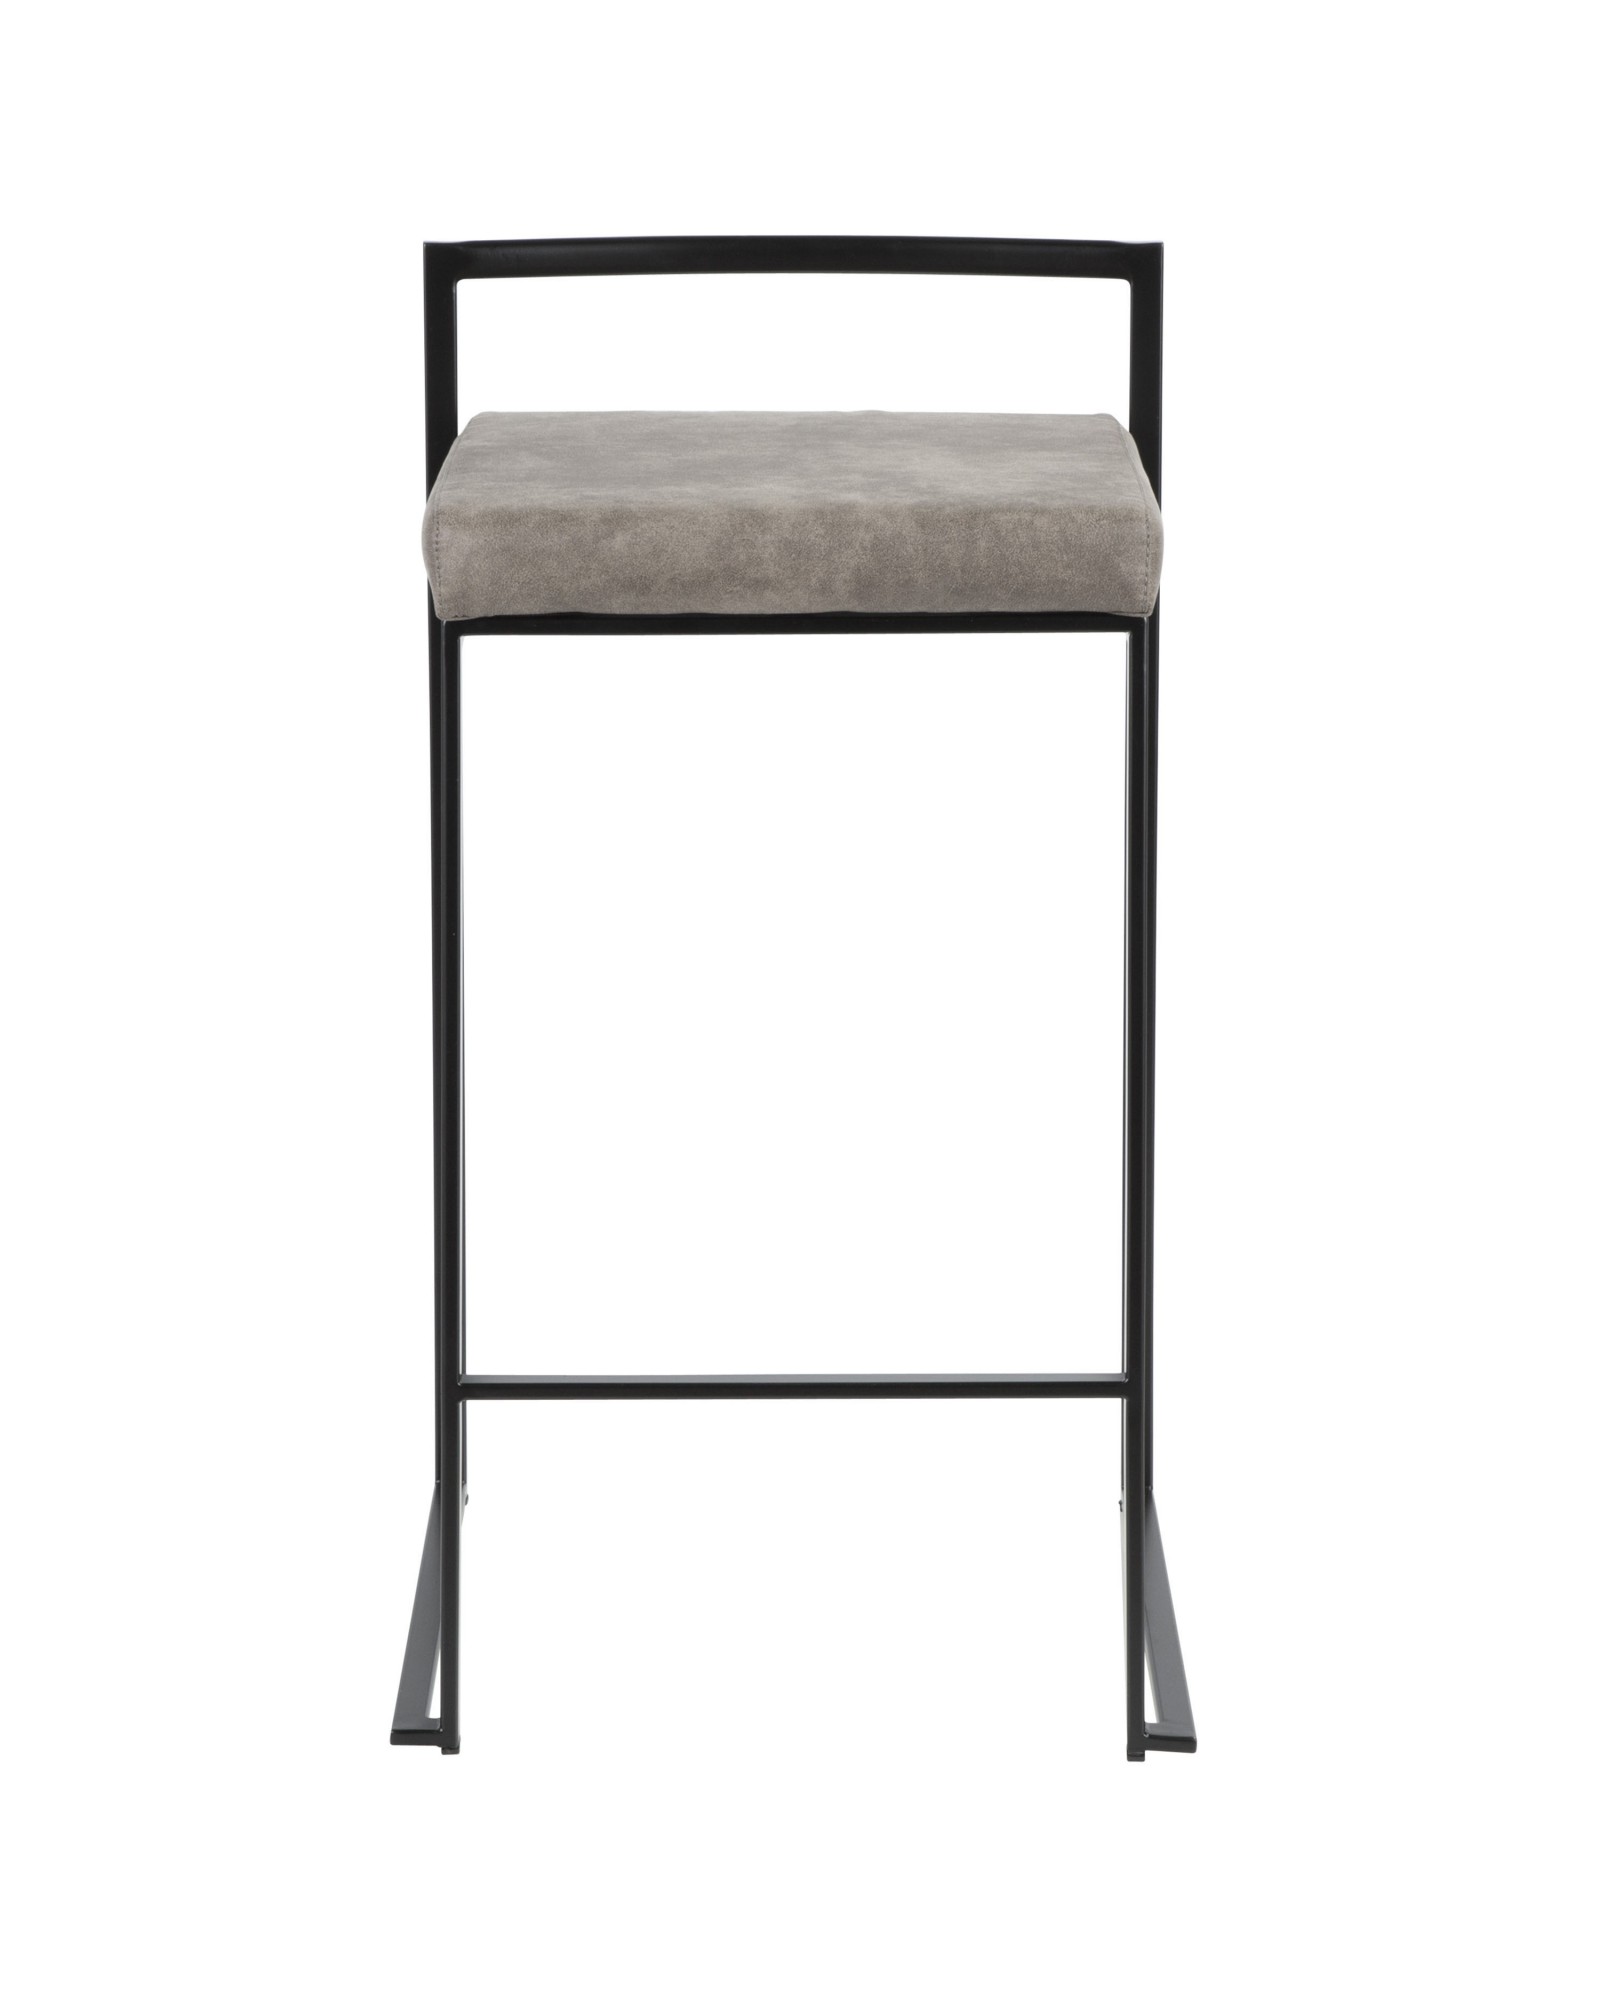 Fuji Contemporary Stackable Counter Stool in Black with Stone Cowboy Fabric Cushion - Set of 2